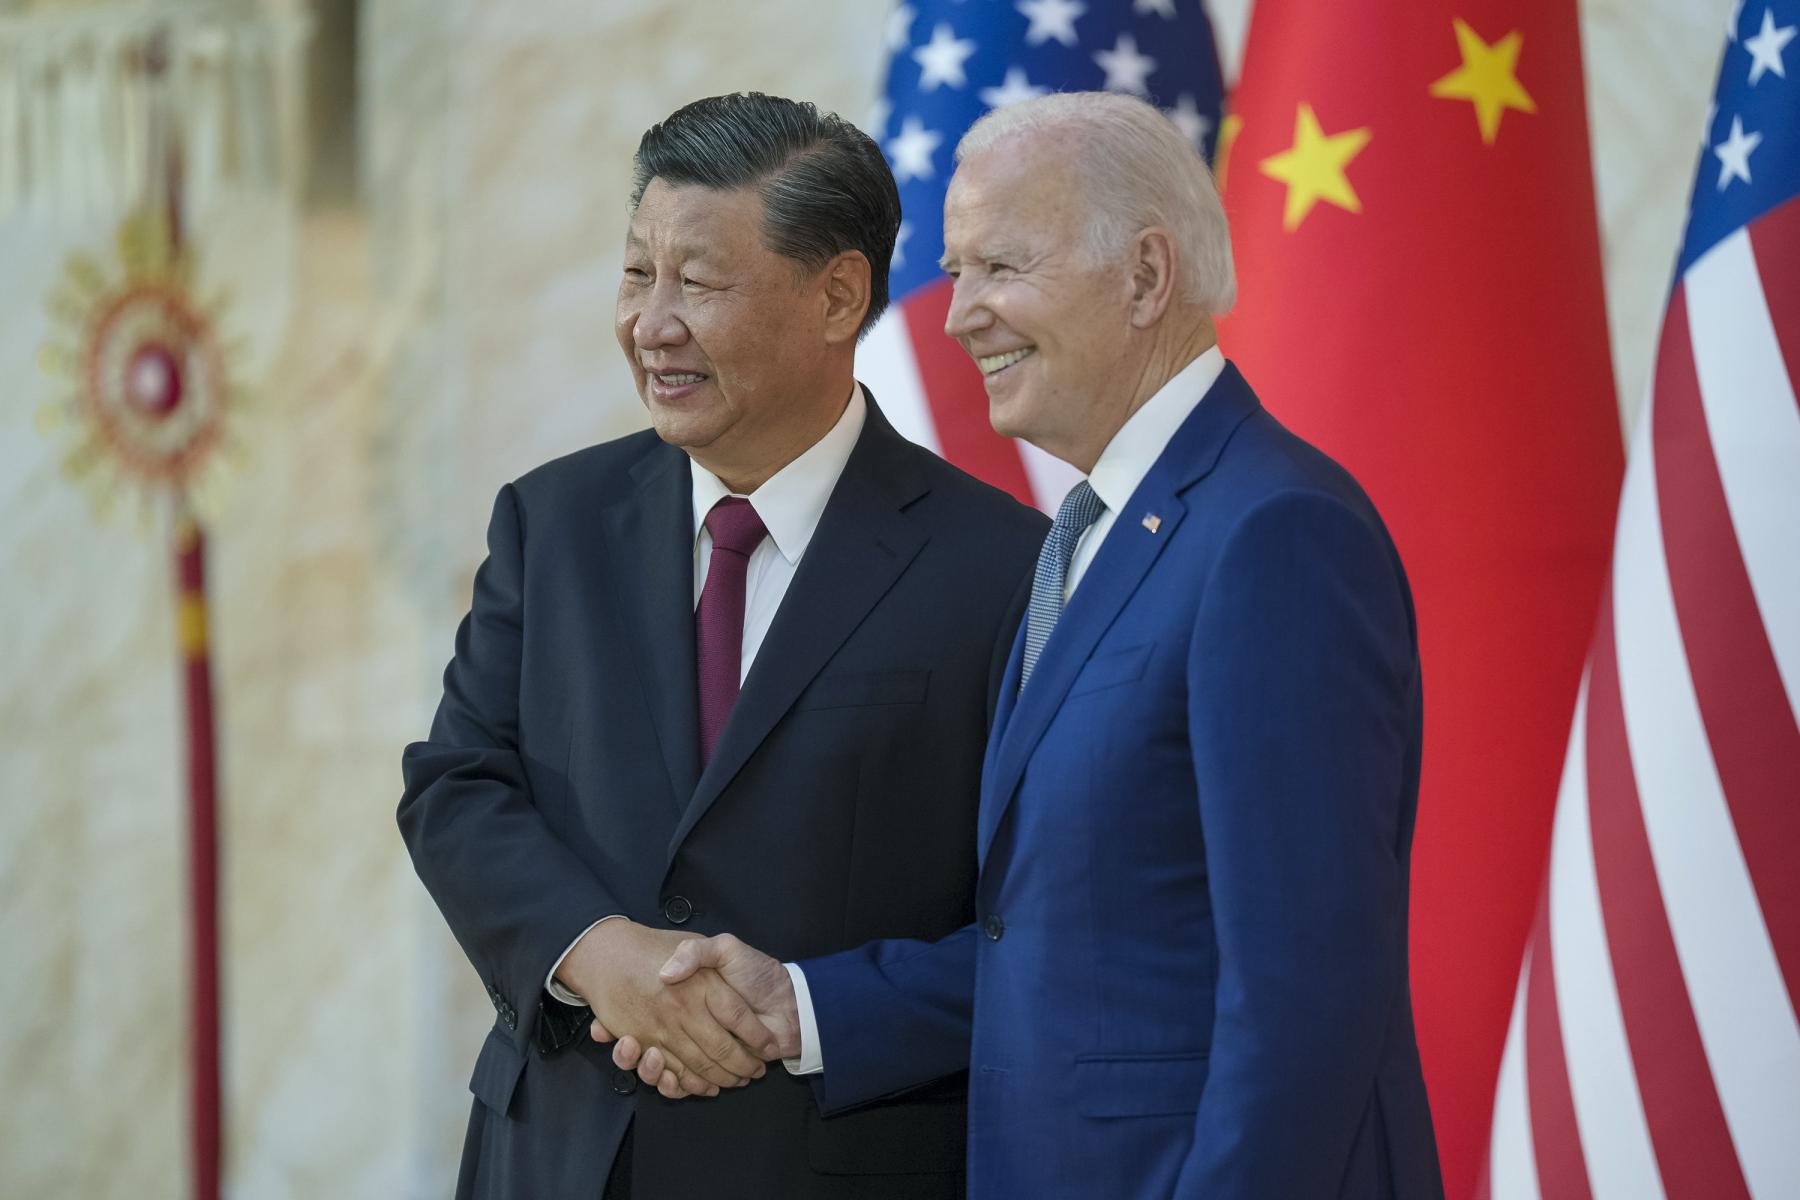 President_Biden_met_with_President_Xi_of_the_PRC_before_the_2022_G20_Bali_Summit_White-House-Public-domain-Wikimedia-Commons.jpg